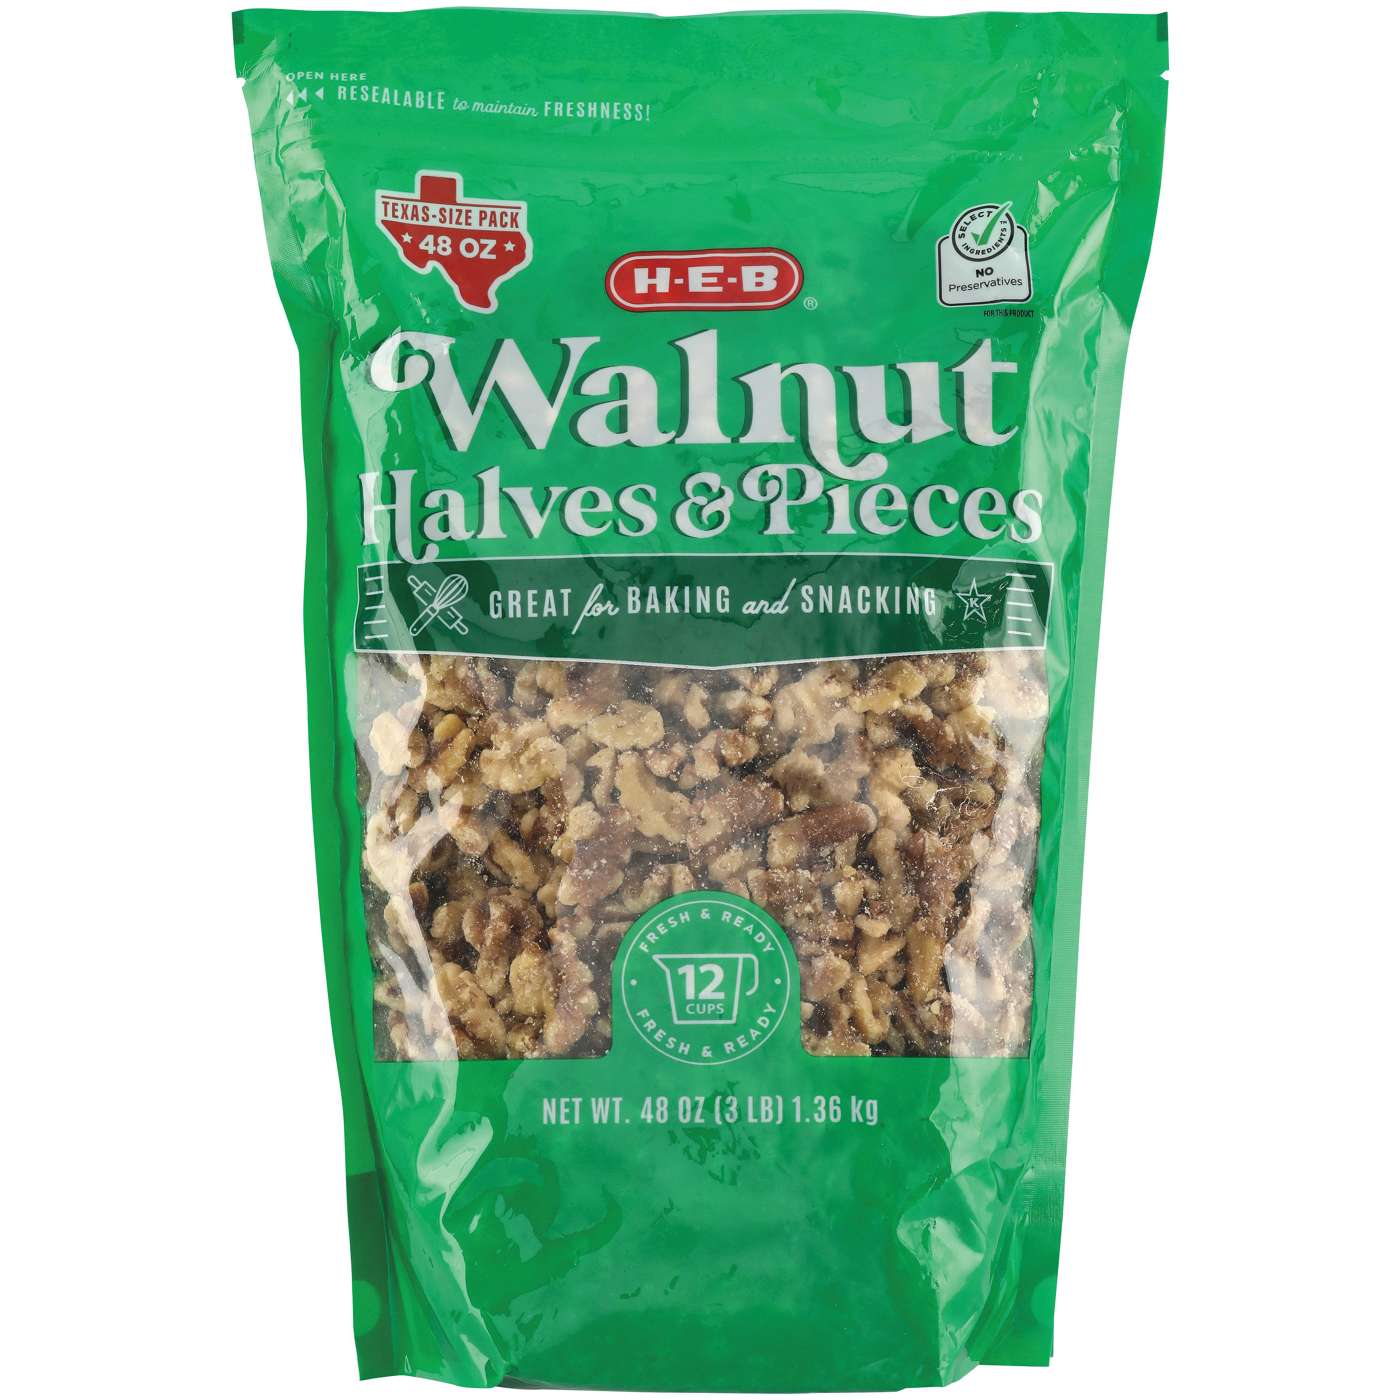 H-E-B Walnut Halves & Pieces - Texas-Size Pack; image 1 of 2